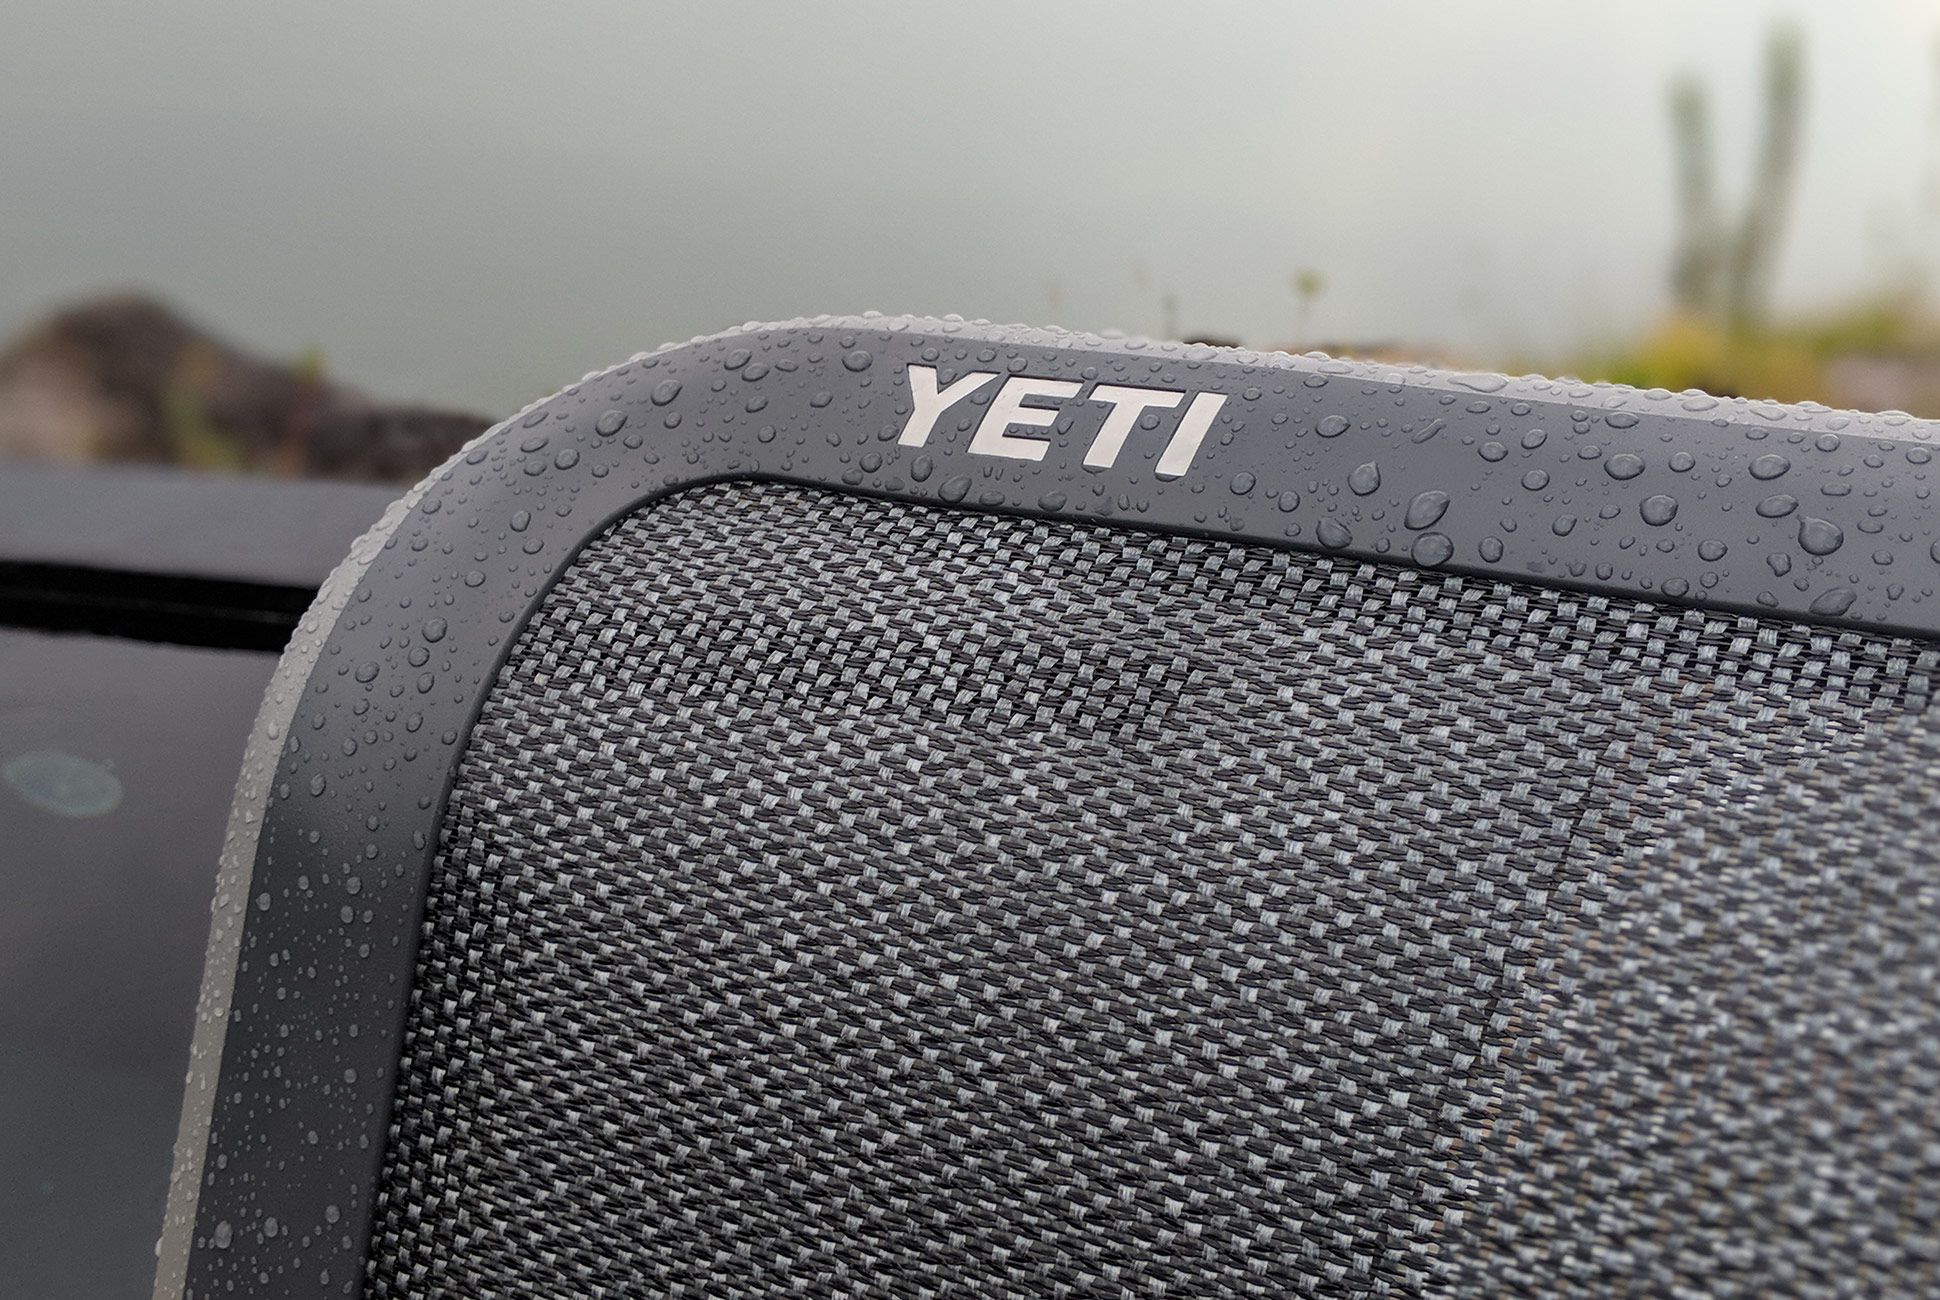 YETI Hondo Base Camp Chair  The Mother of all Camp Chairs - The Gear Bunker